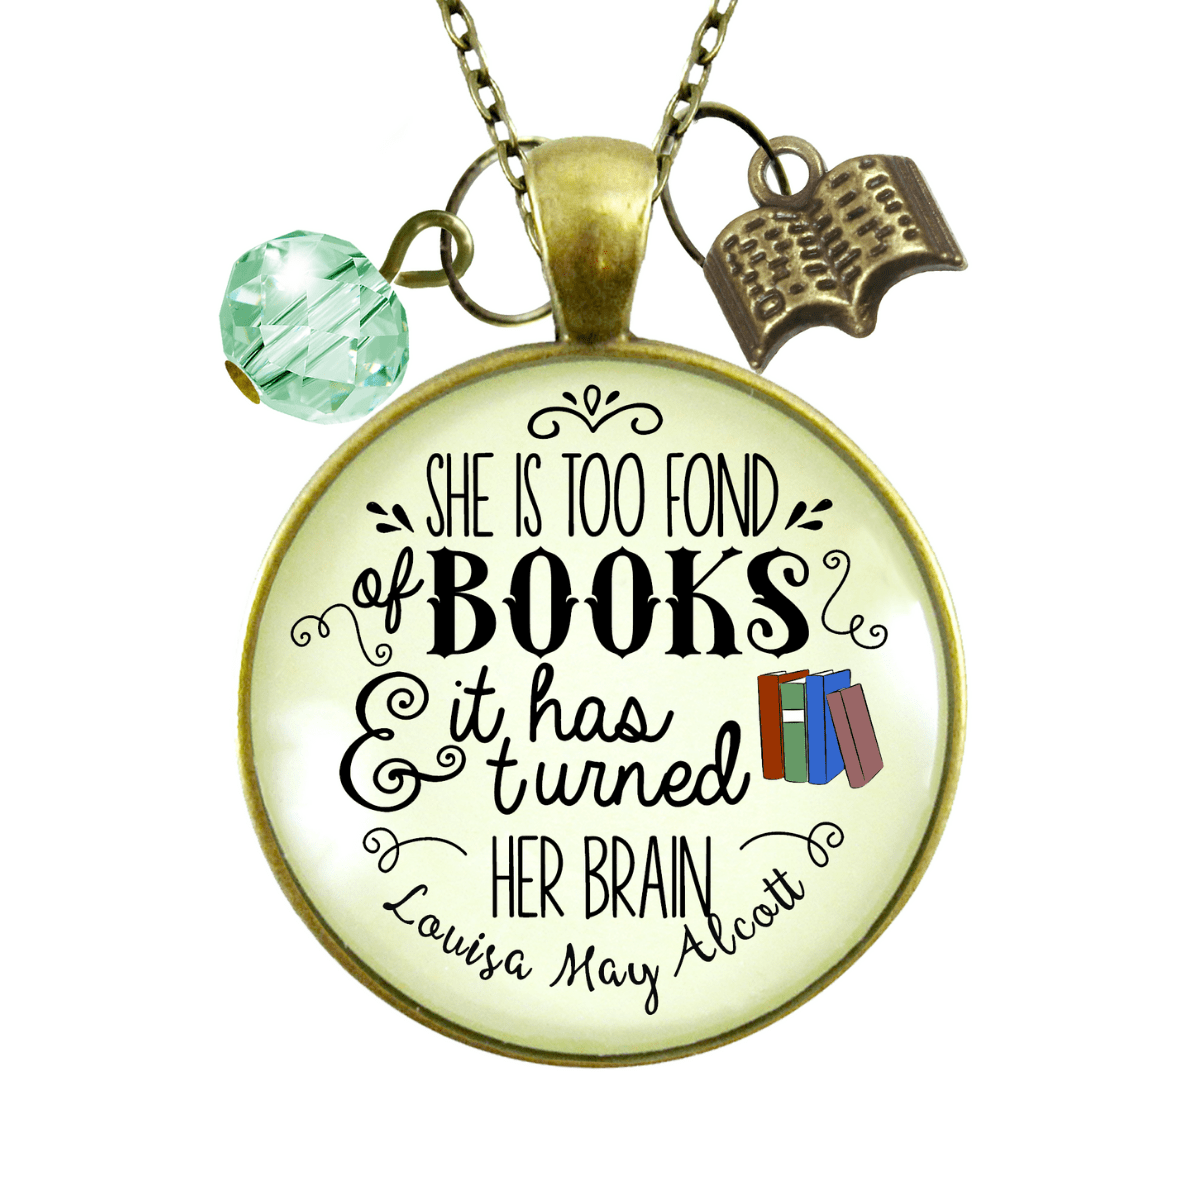 Book Necklace She Is Too Fond Literary Quote Louisa May Alcott Jewelry Green Charm - Gutsy Goodness Handmade Jewelry;Book Necklace She Is Too Fond Literary Quote Louisa May Alcott Jewelry Green Charm - Gutsy Goodness Handmade Jewelry Gifts